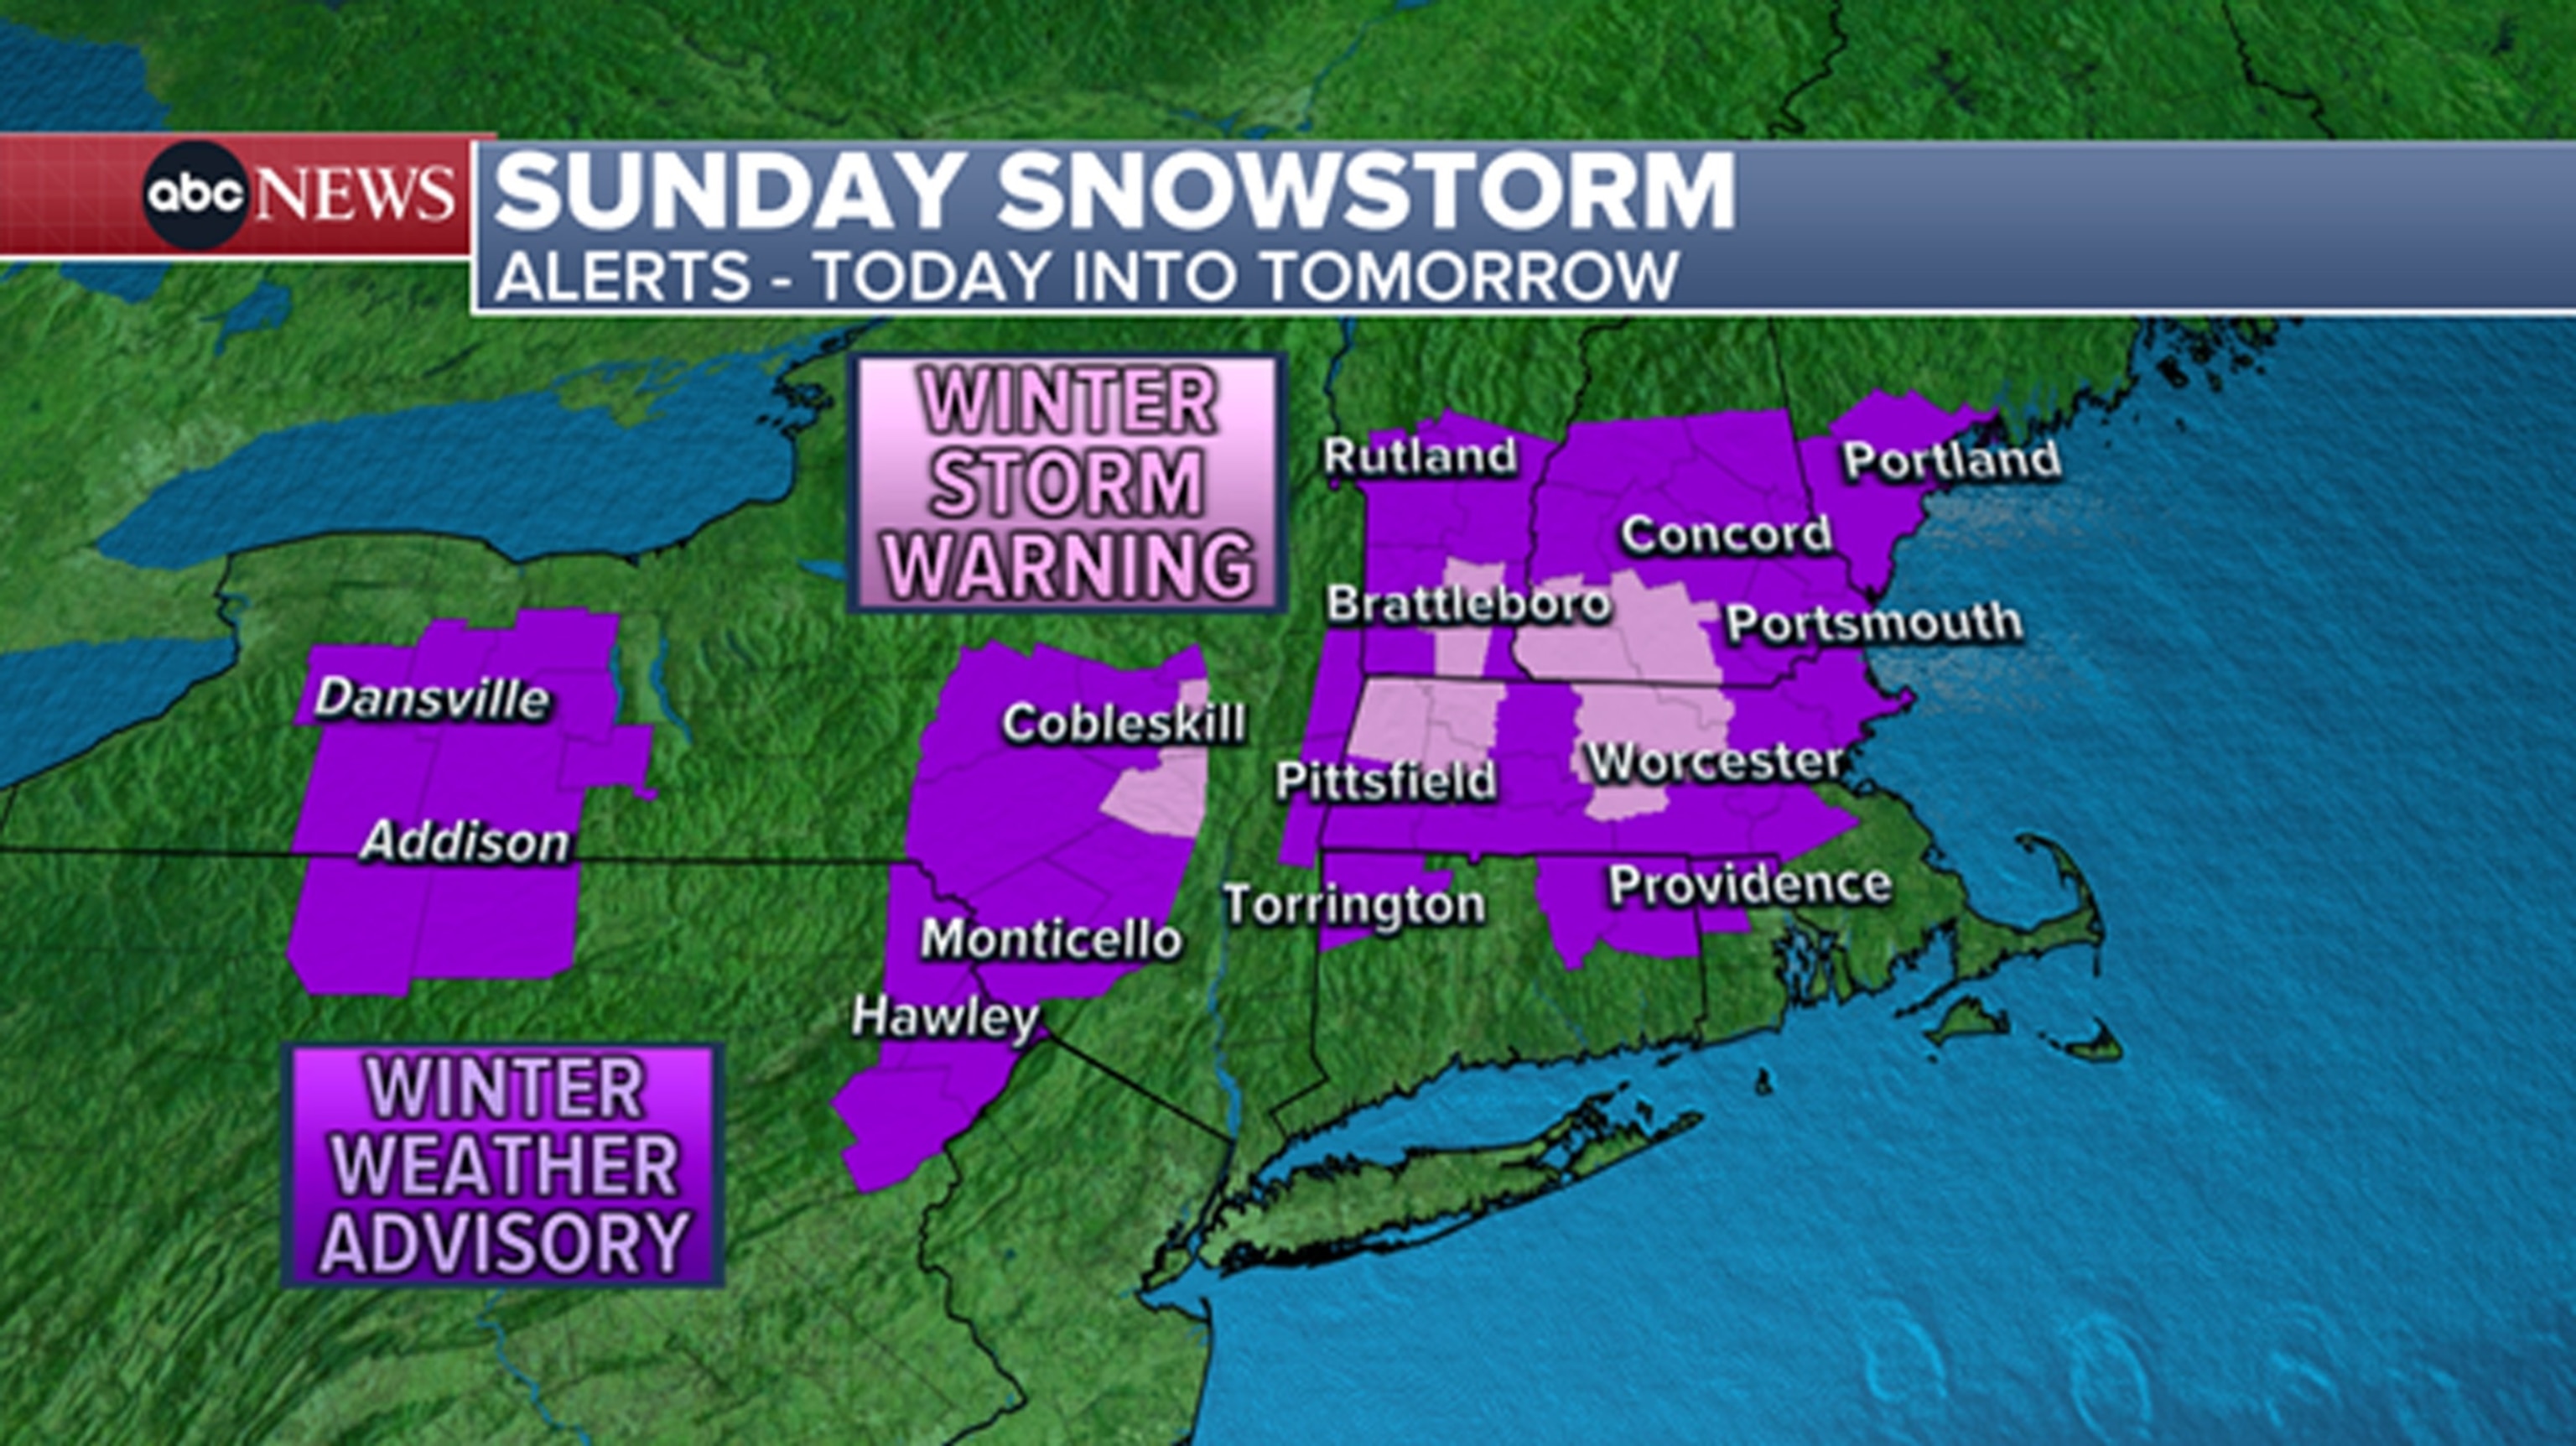 PHOTO: Winter Weather Advisories (seen in purple) are in effect for several locations in the northeast, with an upgrade to Winter Storm Warnings (pink shading) for parts of Massachusetts, New York, Vermont, and New Hampshire.